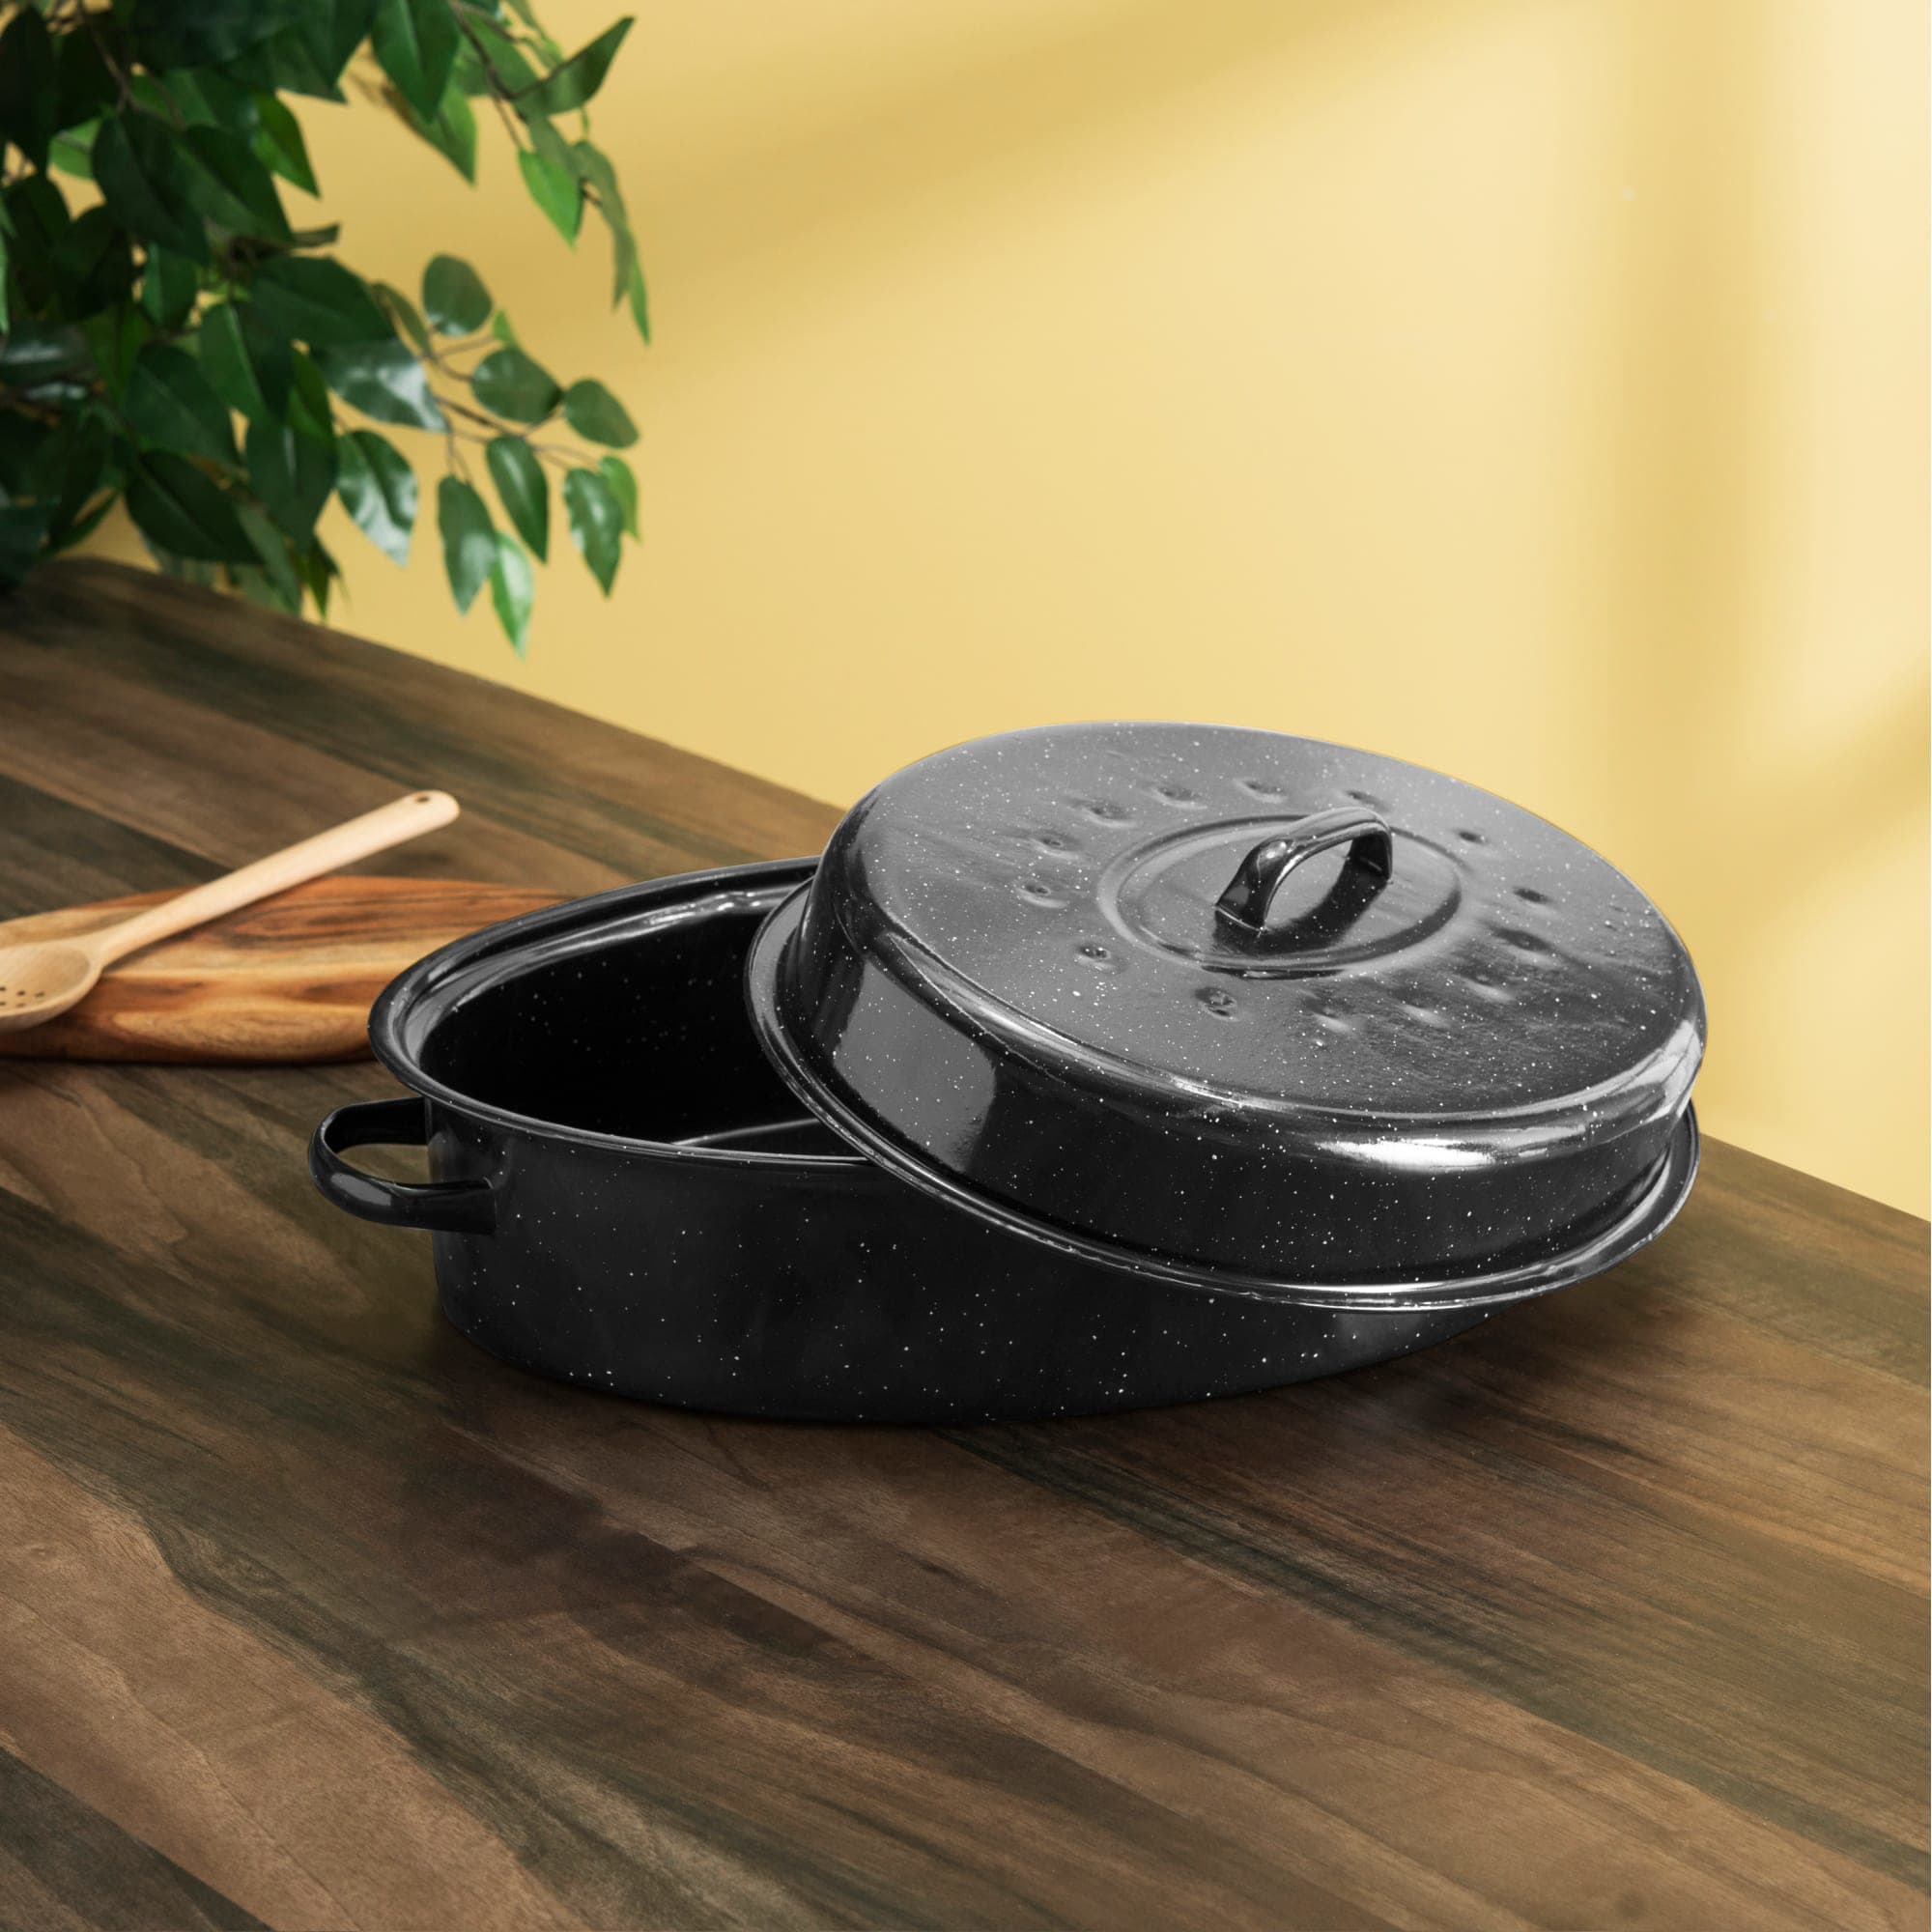 Home Basics Non-Stick Carbon Steel Roaster with Lid $12.00 EACH, CASE PACK OF 6